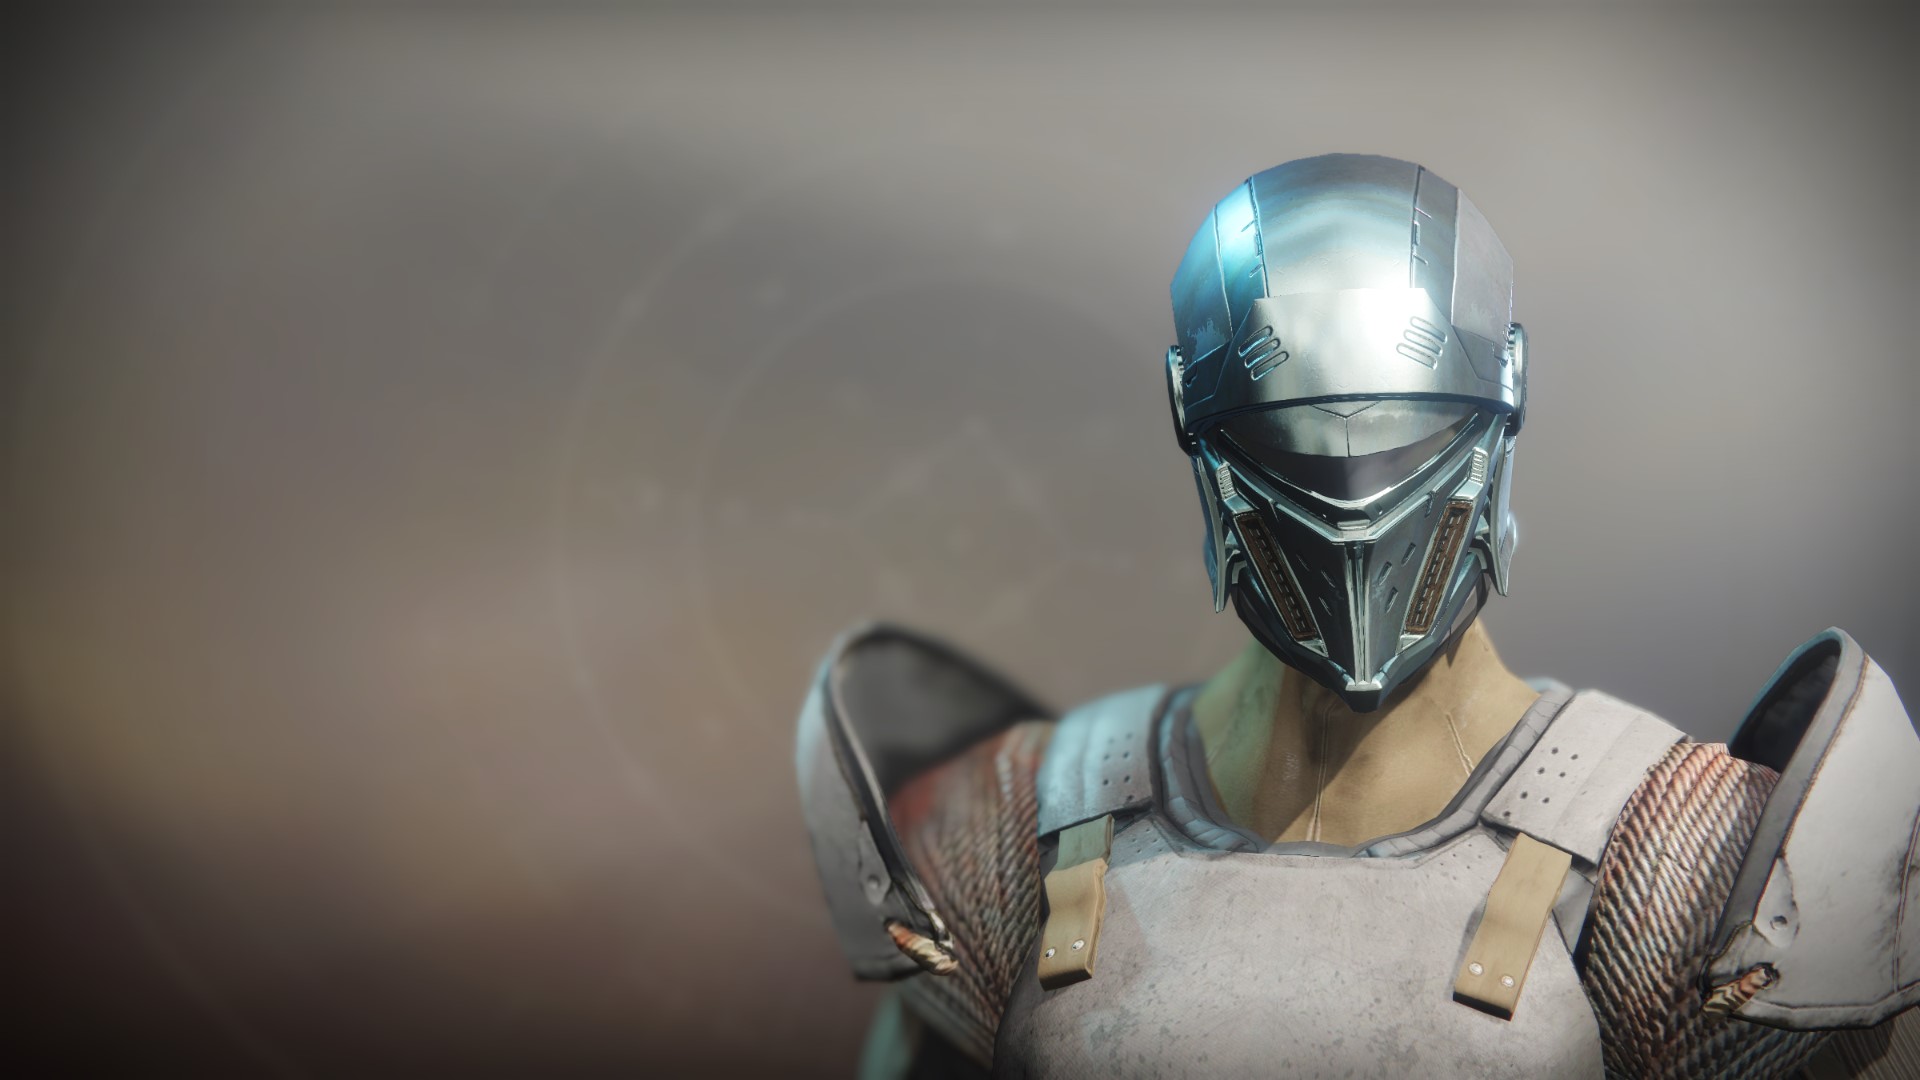 An in-game render of the Righteous Helm.